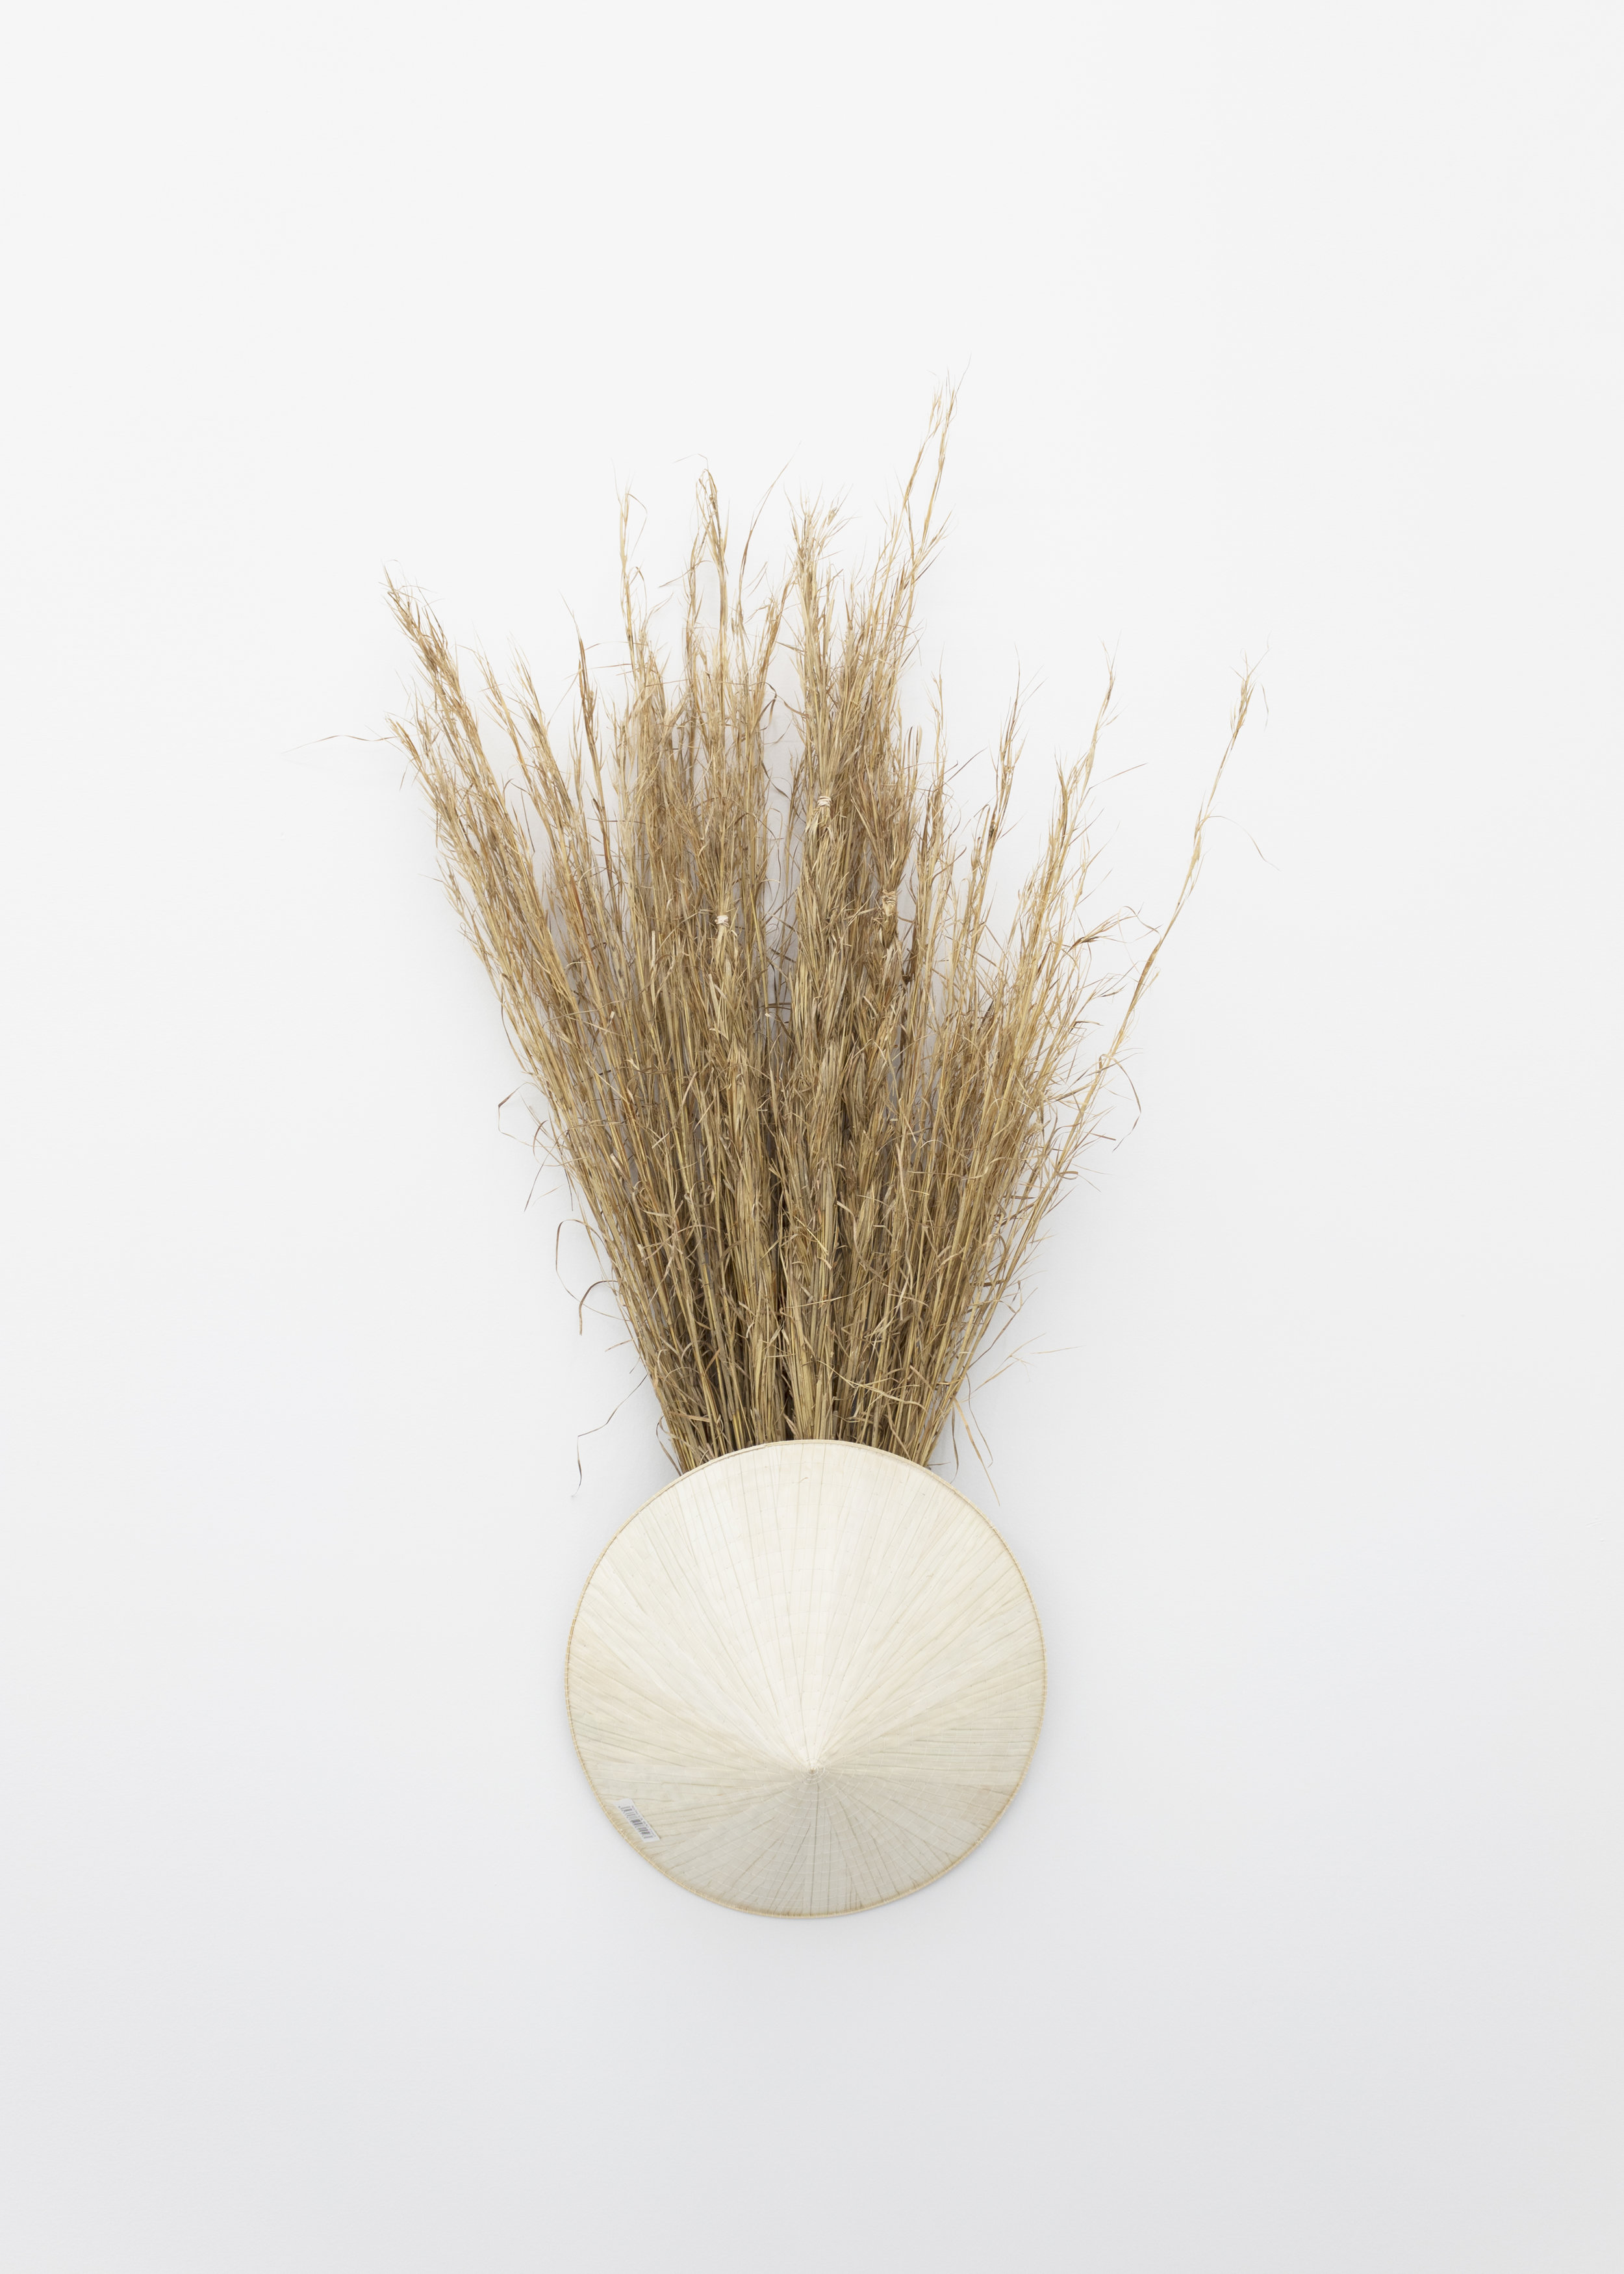  Millian Giang Lien Pham,  Preforge: 9 Stages (Six) , 2019. Grass, conical hat 